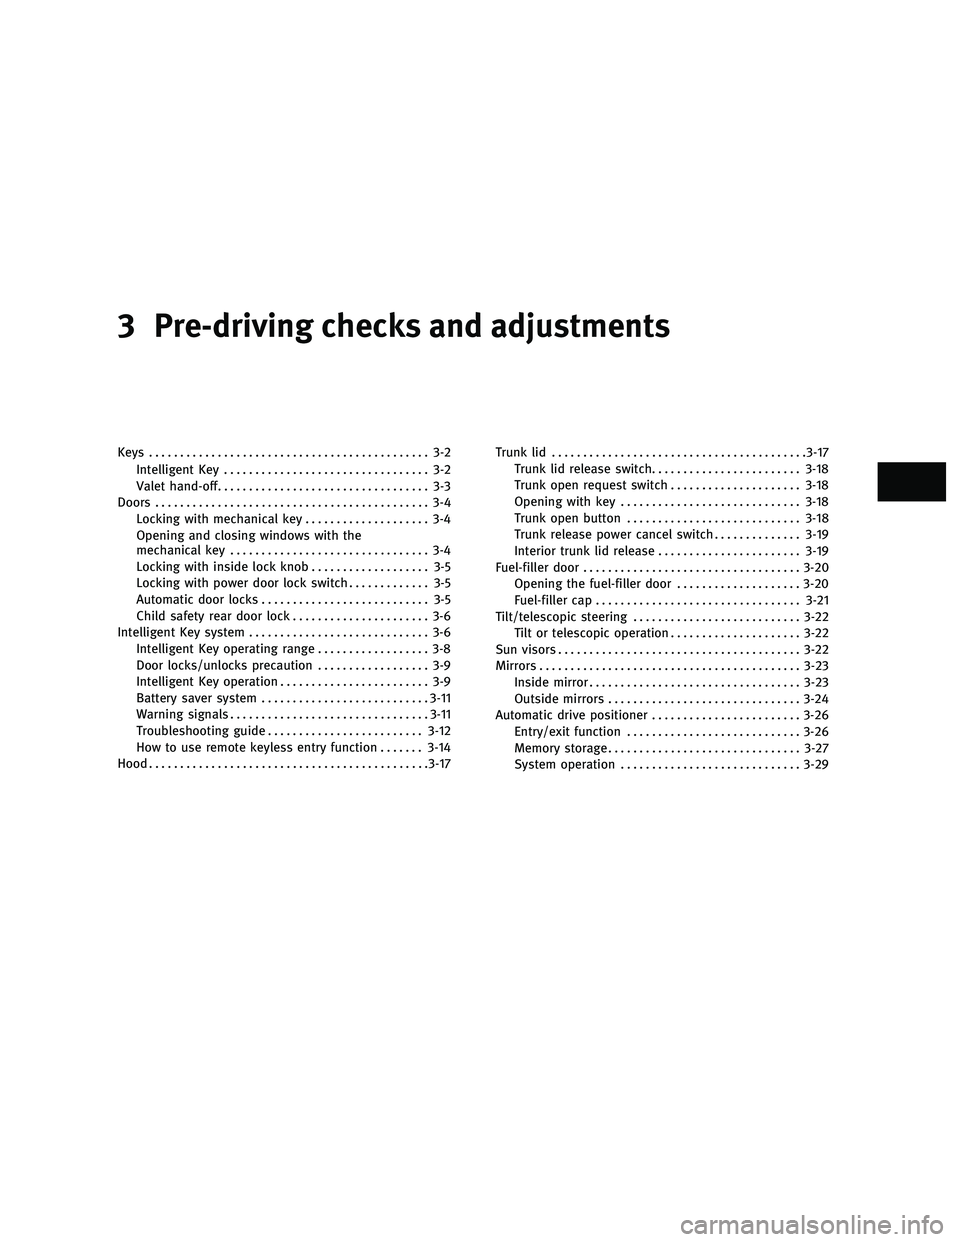 INFINITI M 2010  Owners Manual 3 Pre-driving checks and adjustments
Keys............................................. 3-2
Intelligent Key ................................. 3-2
Valet hand-off .................................. 3-3
D